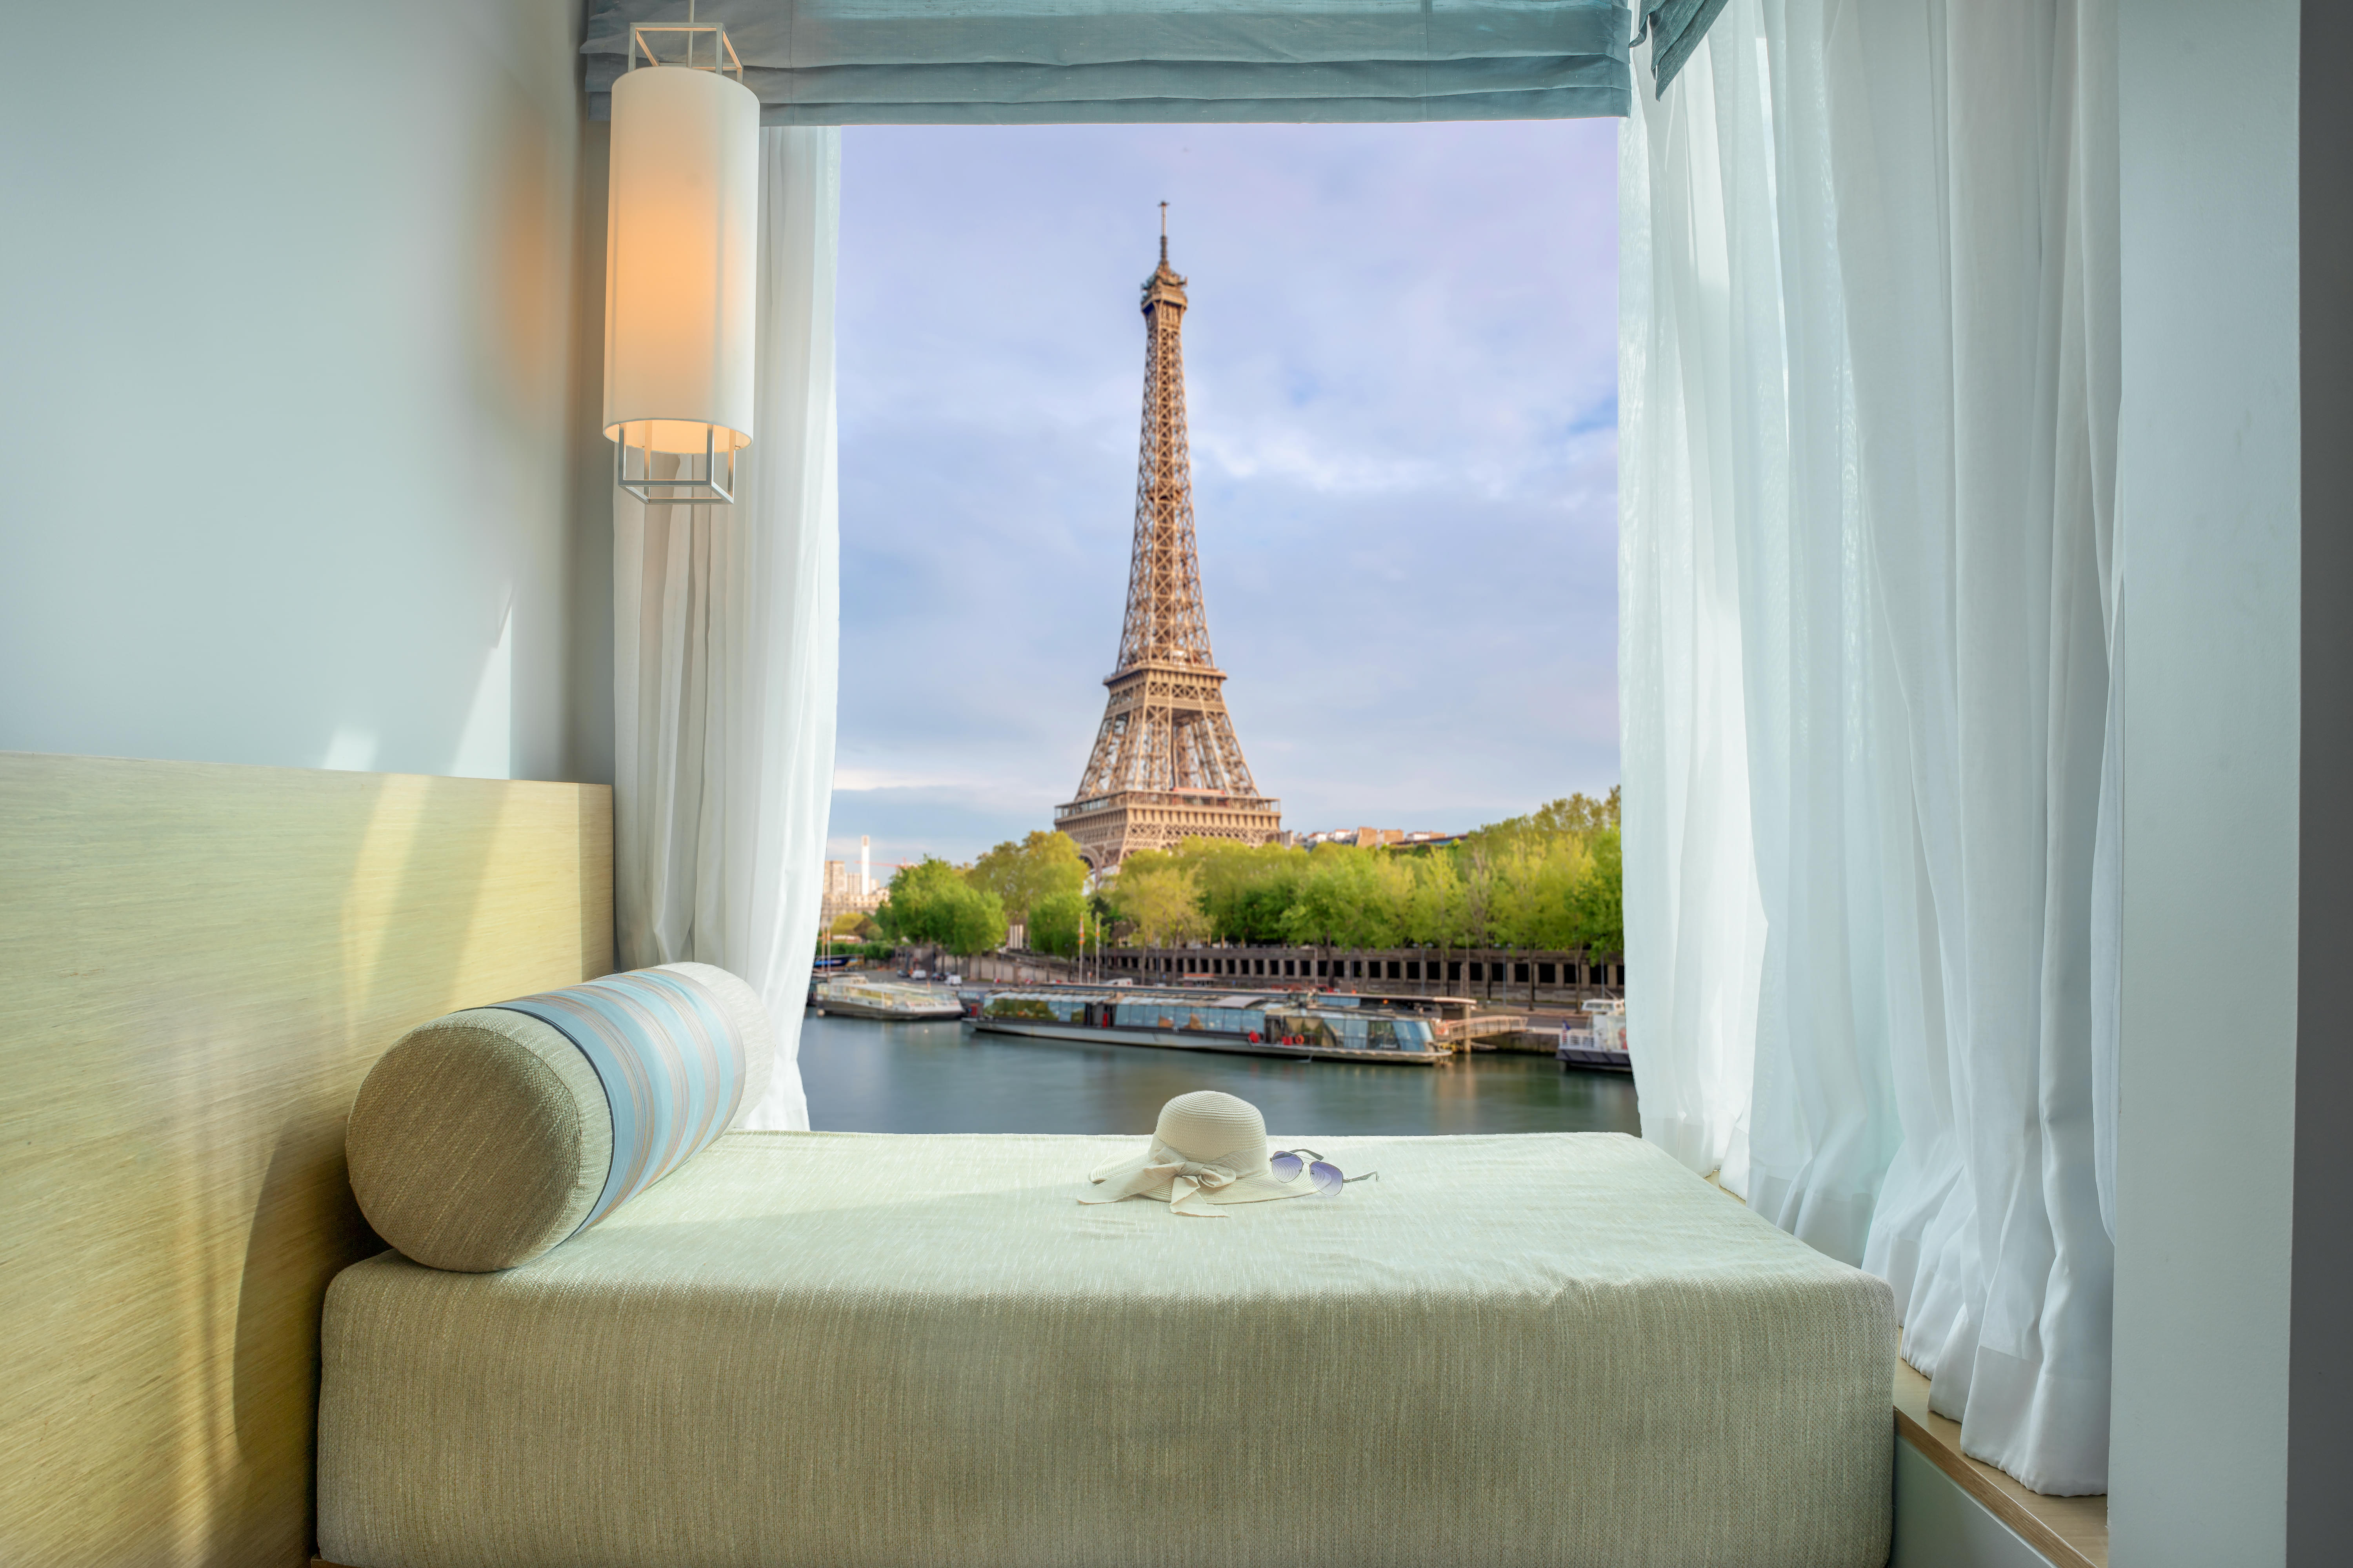 Paris hotels with the Best View of the Eiffel Tower